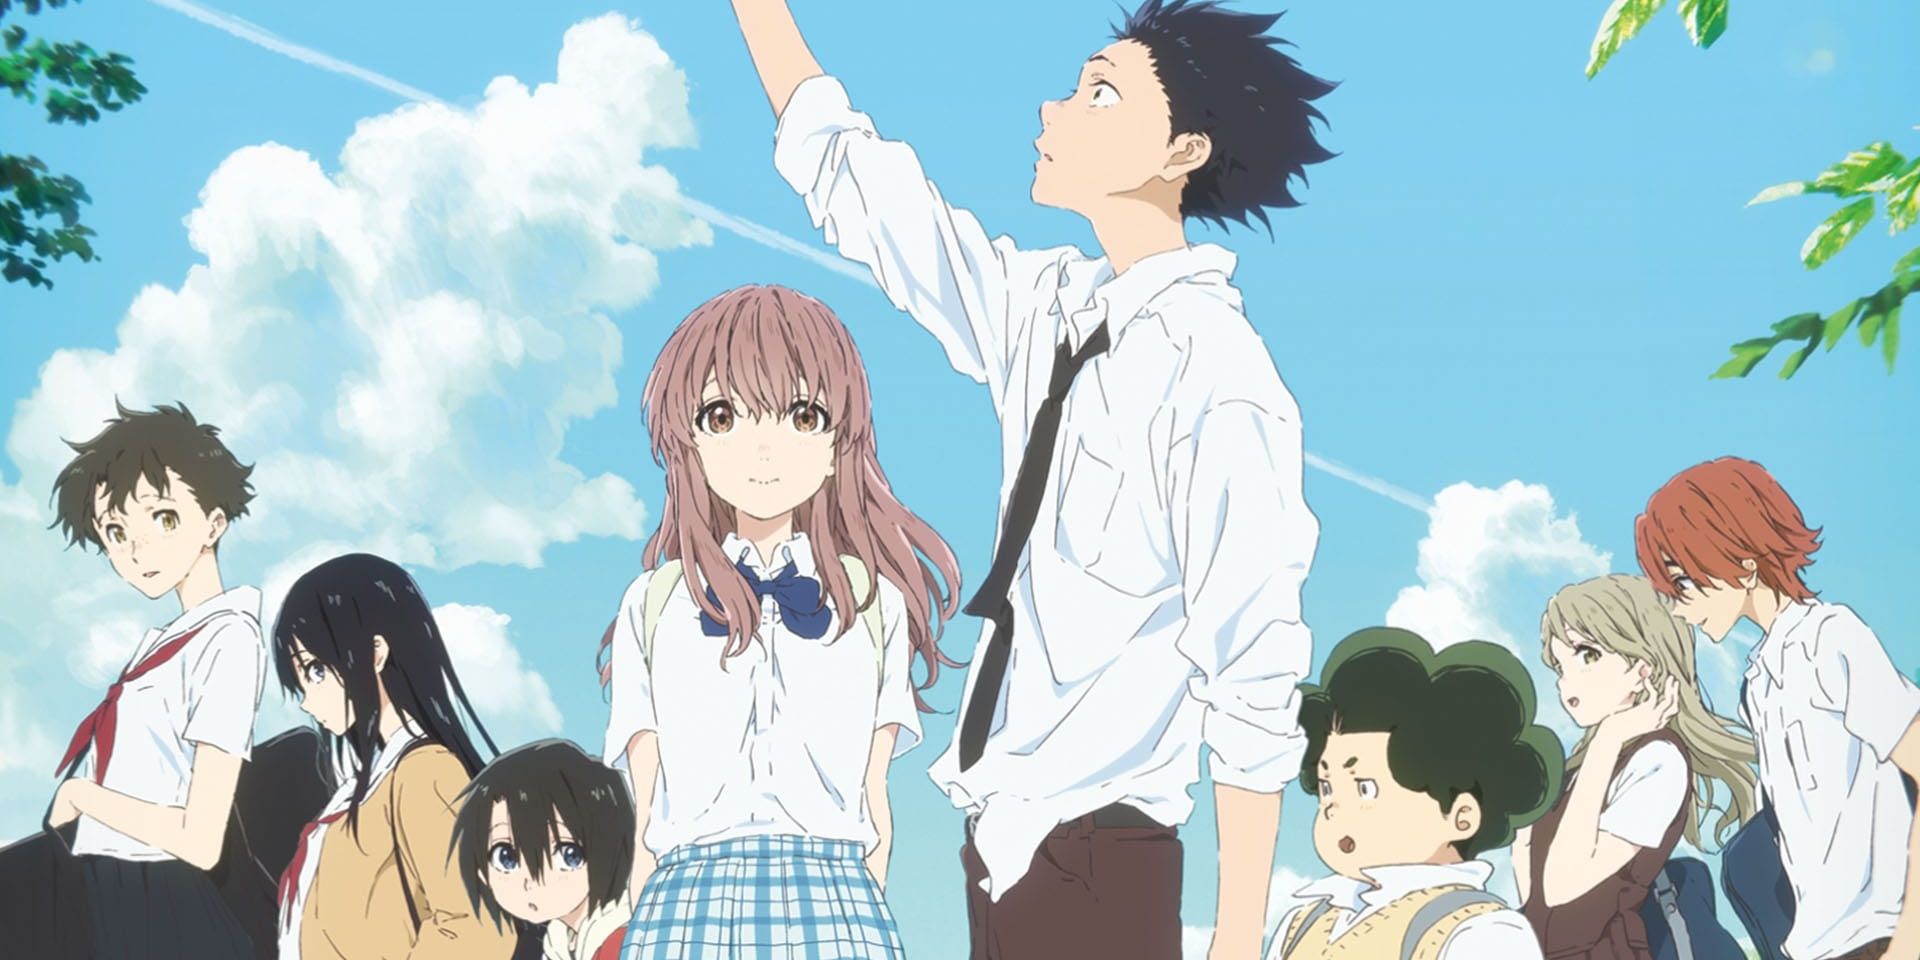 A Silent Voice characters standing together